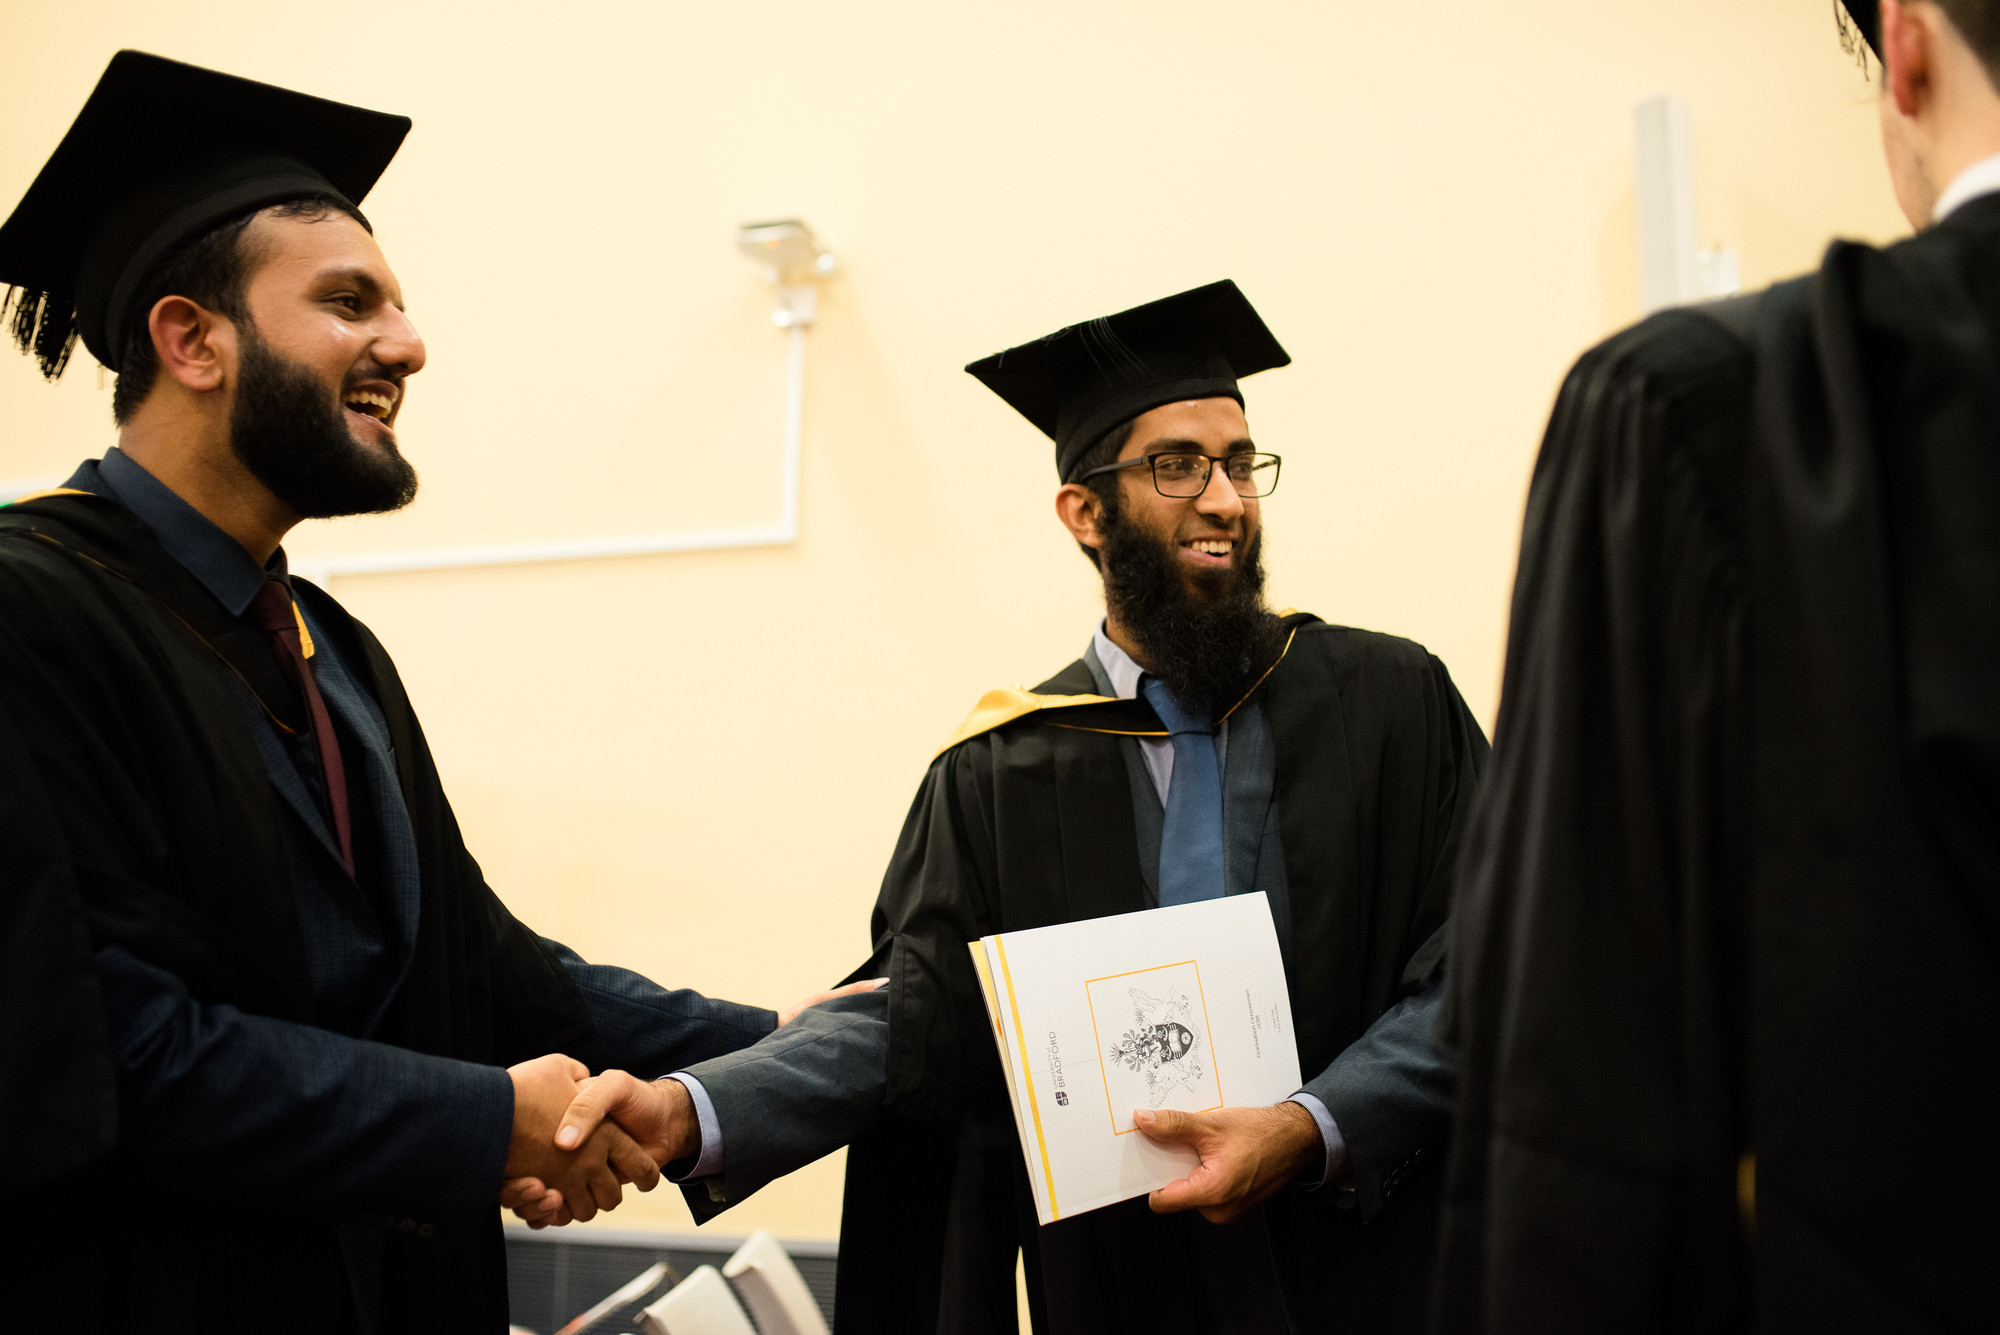 Two graduates shaking hands